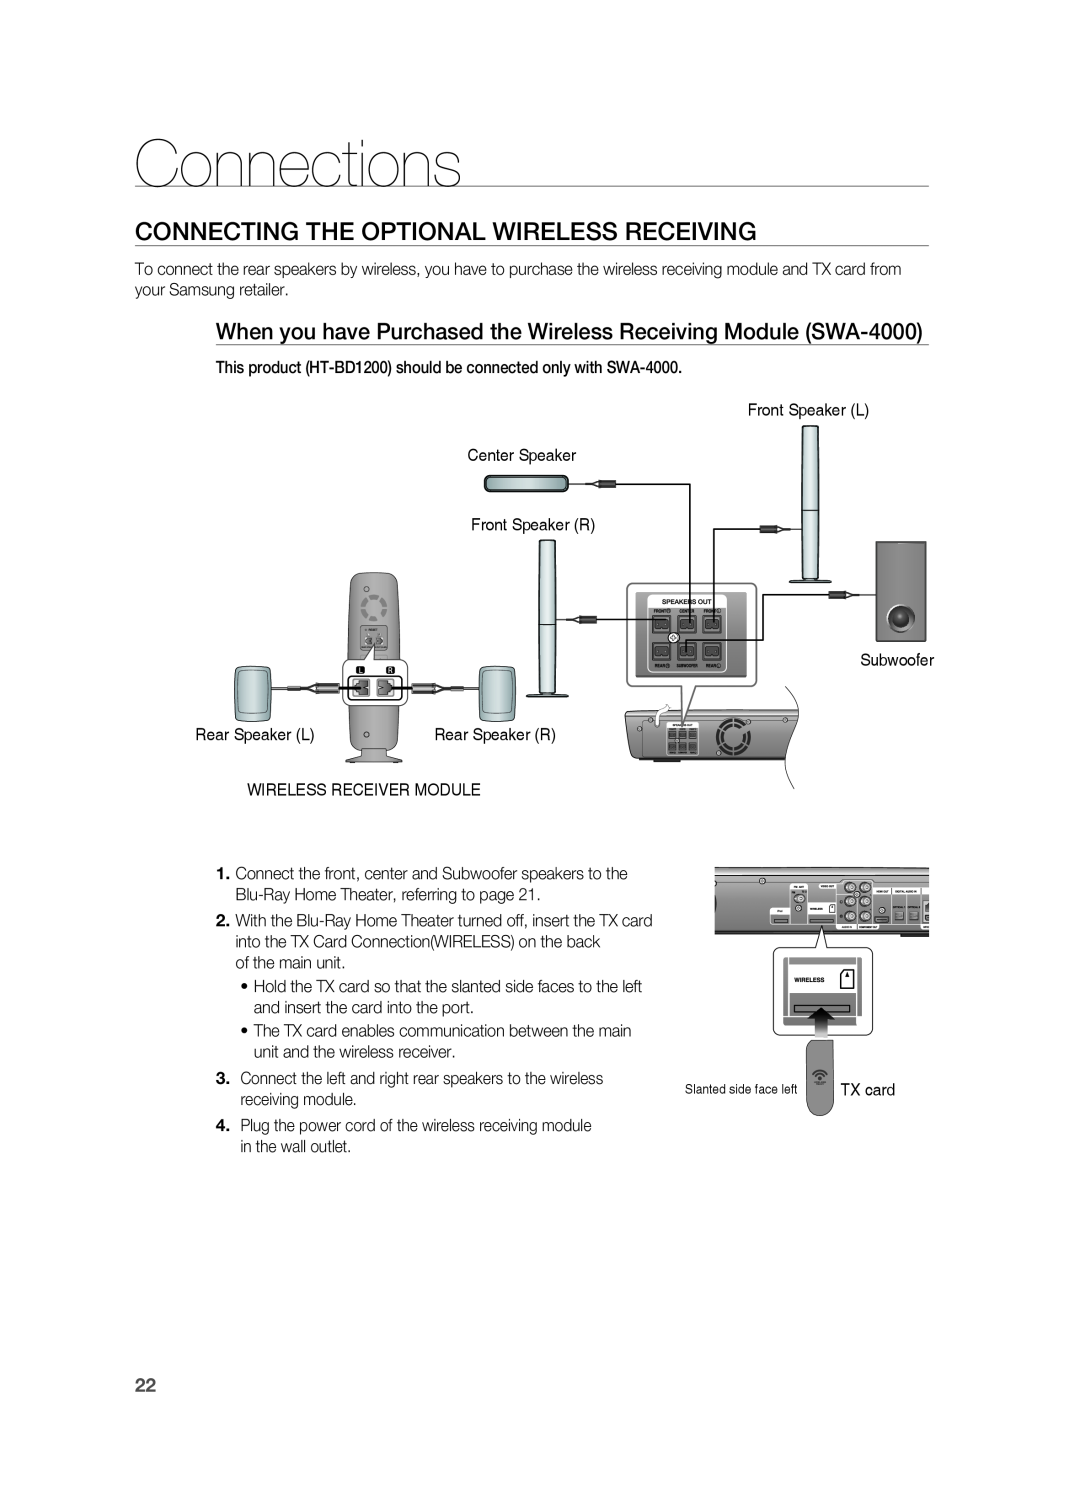 Samsung AH68-02178Z, HT-BD1200 user manual Connecting The Optional Wireless Receiving, Connections 